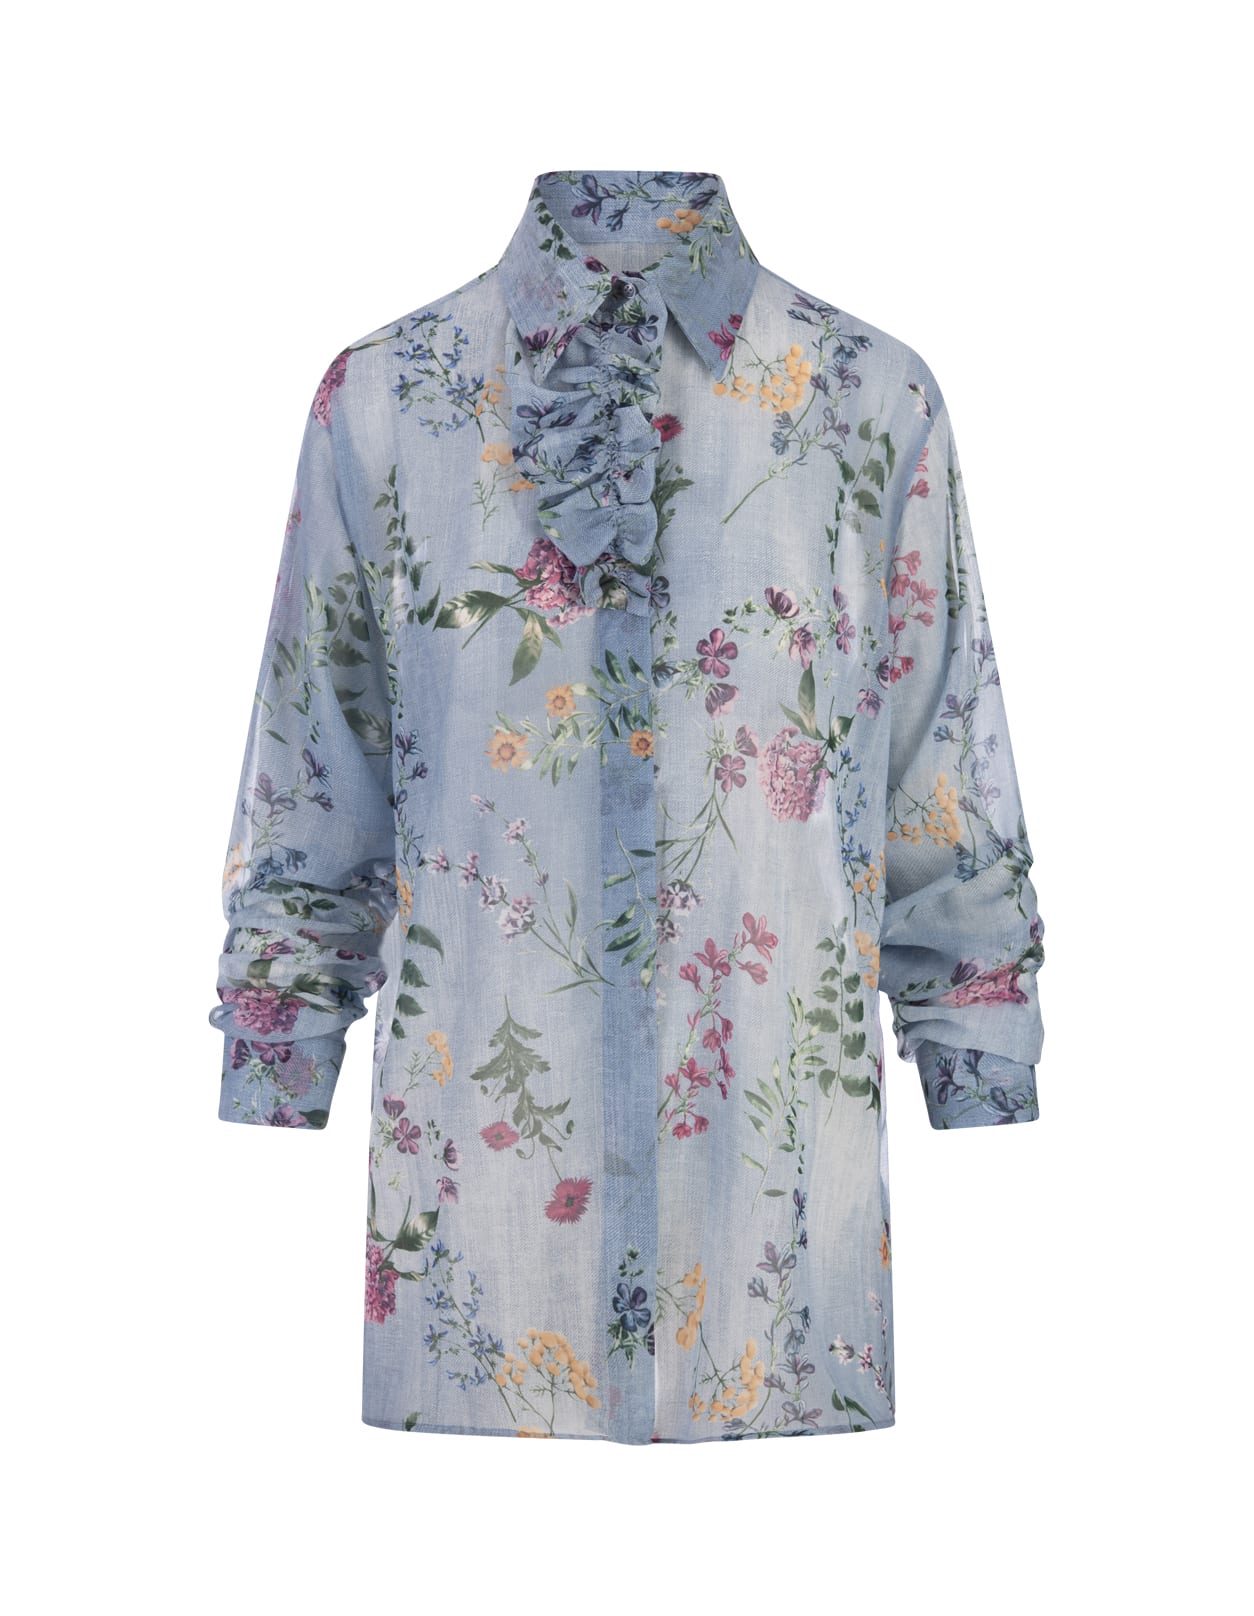 Soft Shirt With Floral Print